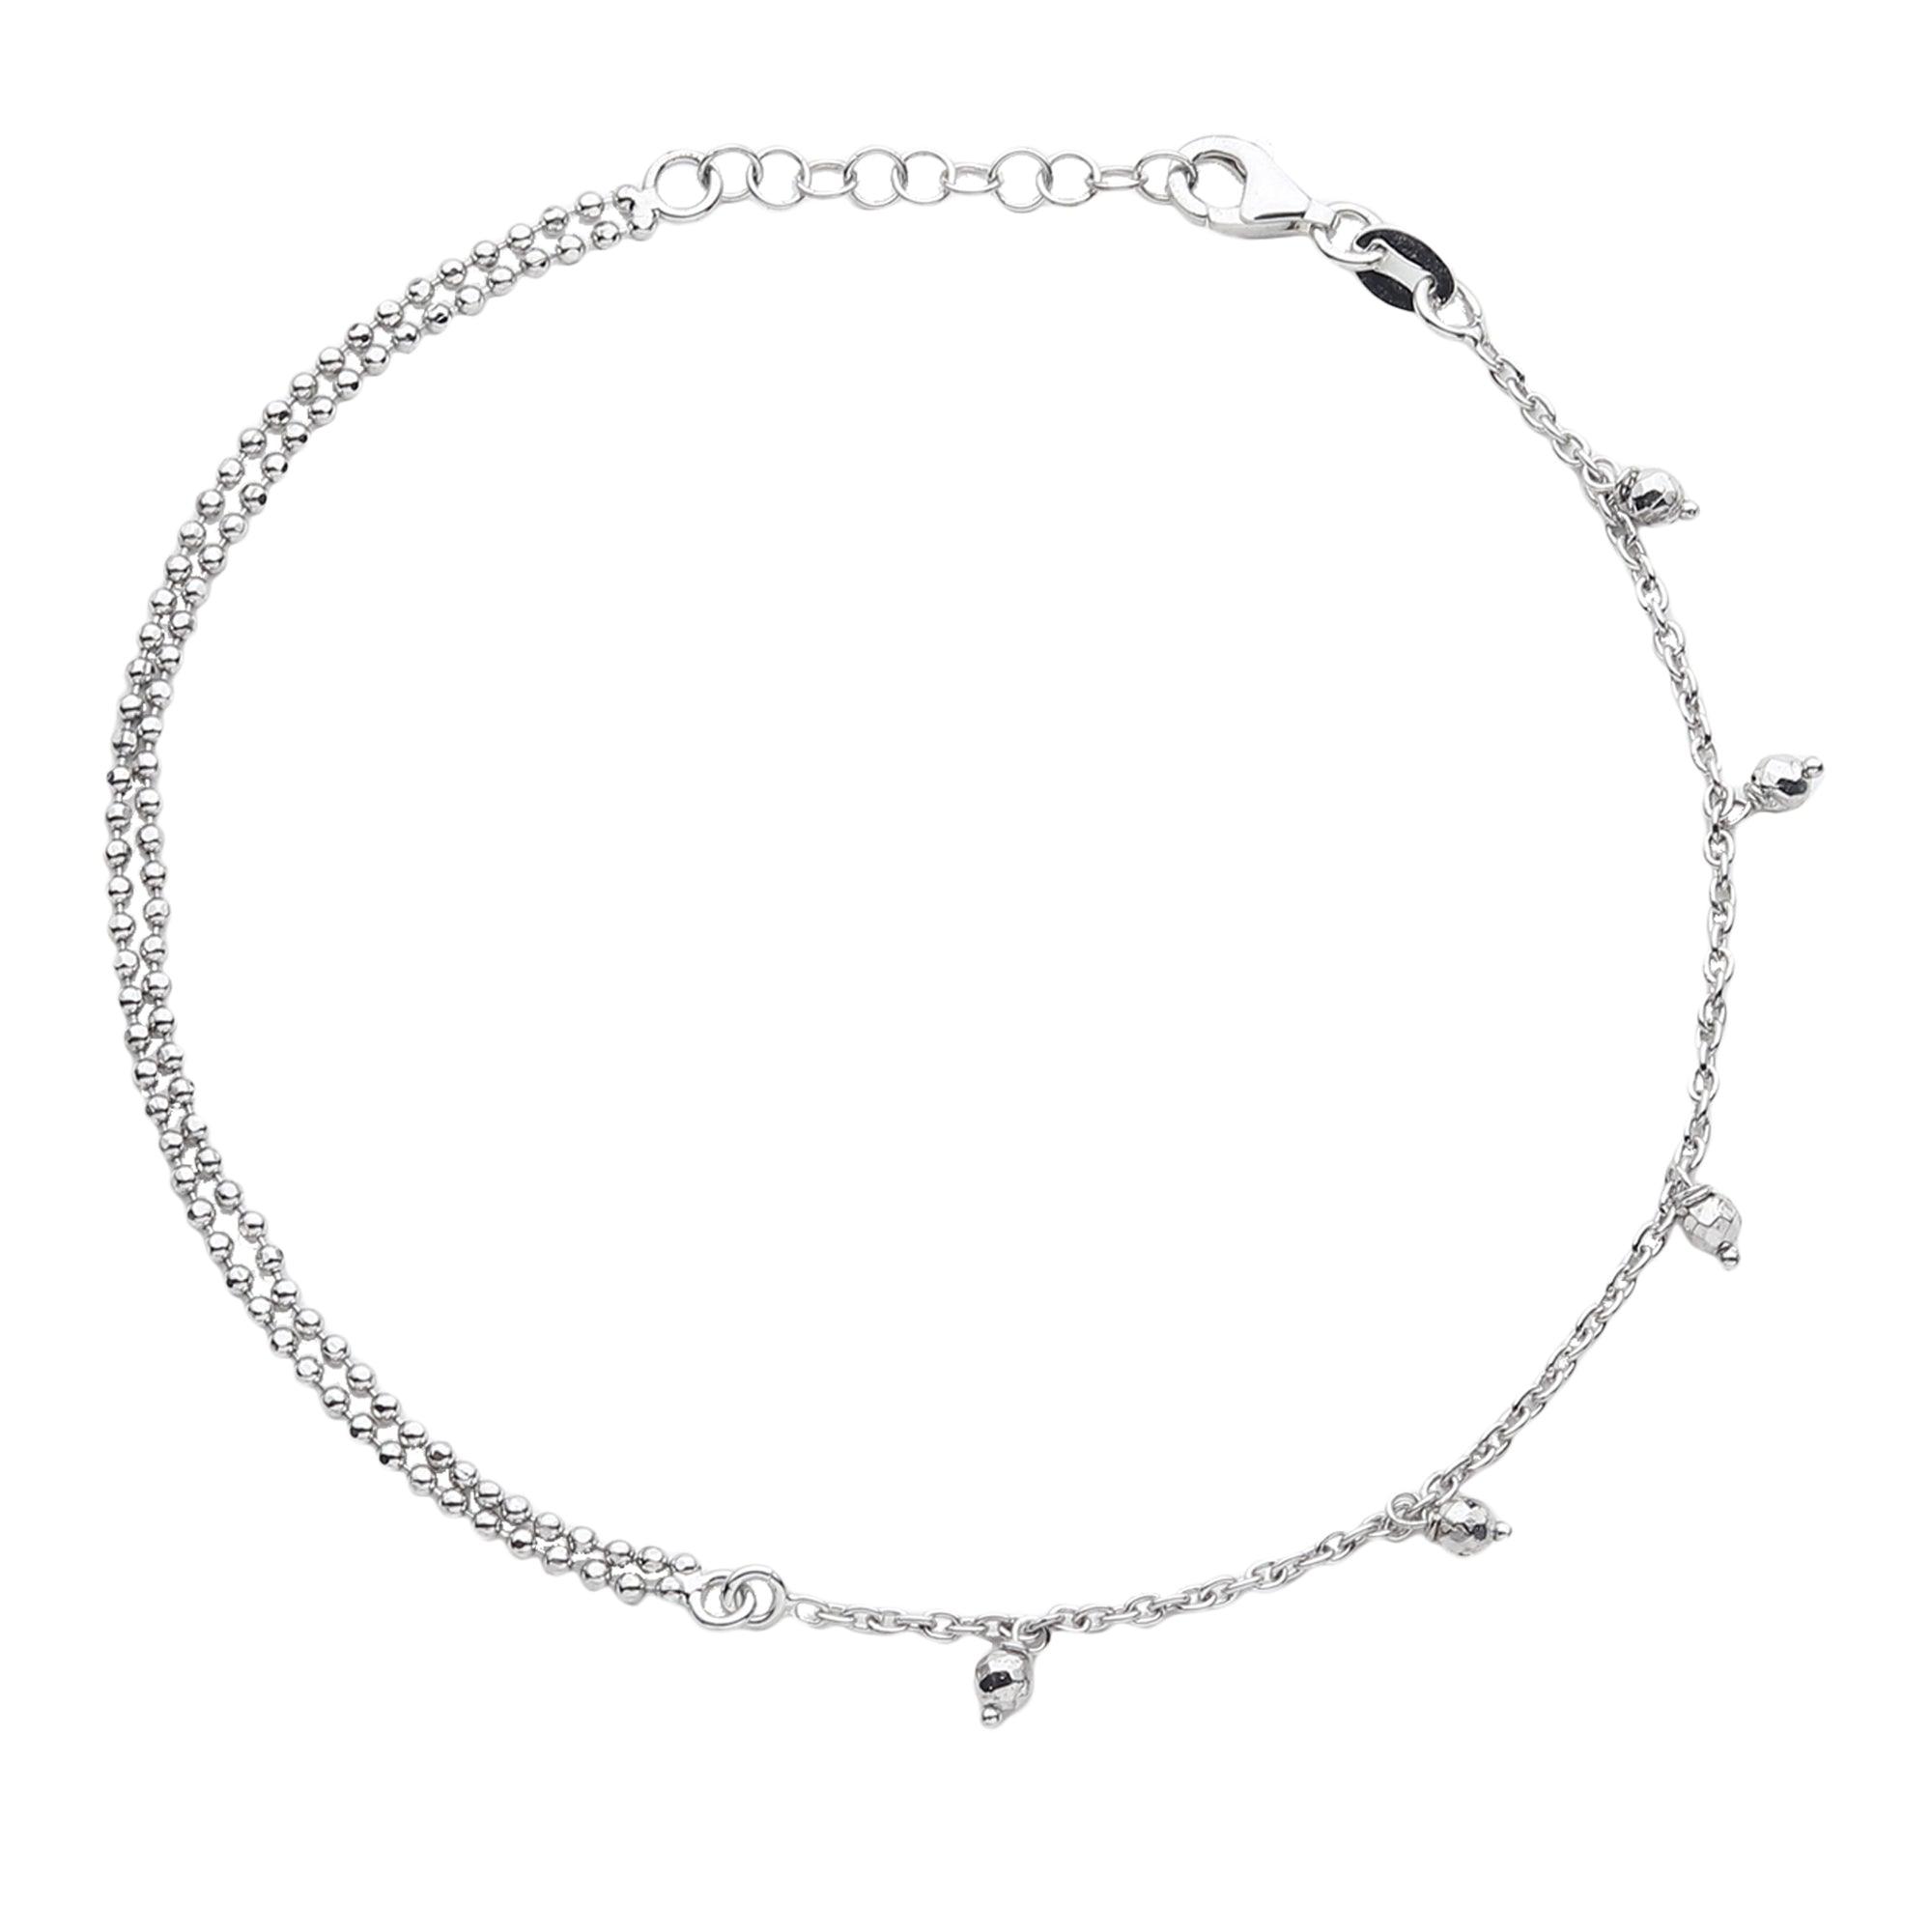 The Shiny Beads Fairy Anklet - silvermark